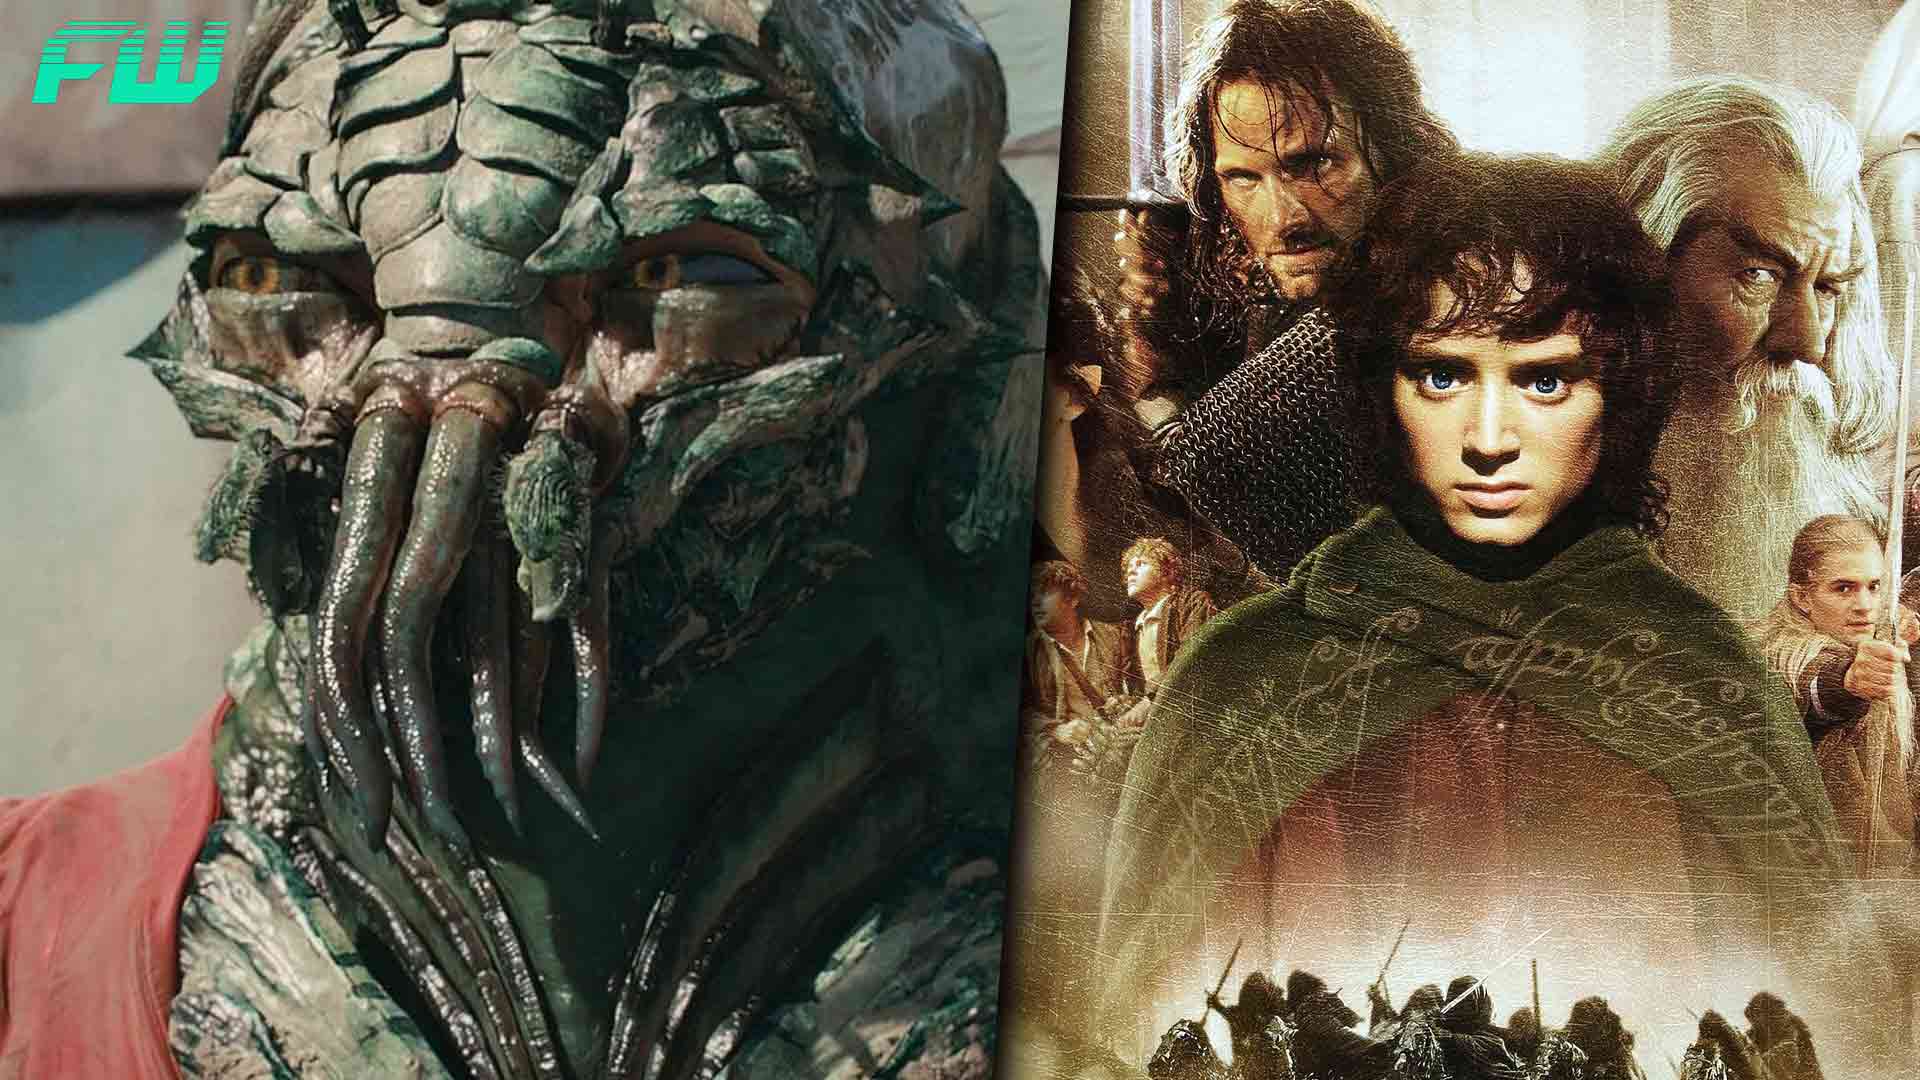 4 Of The Worst And Best CGI In Movies - FandomWire